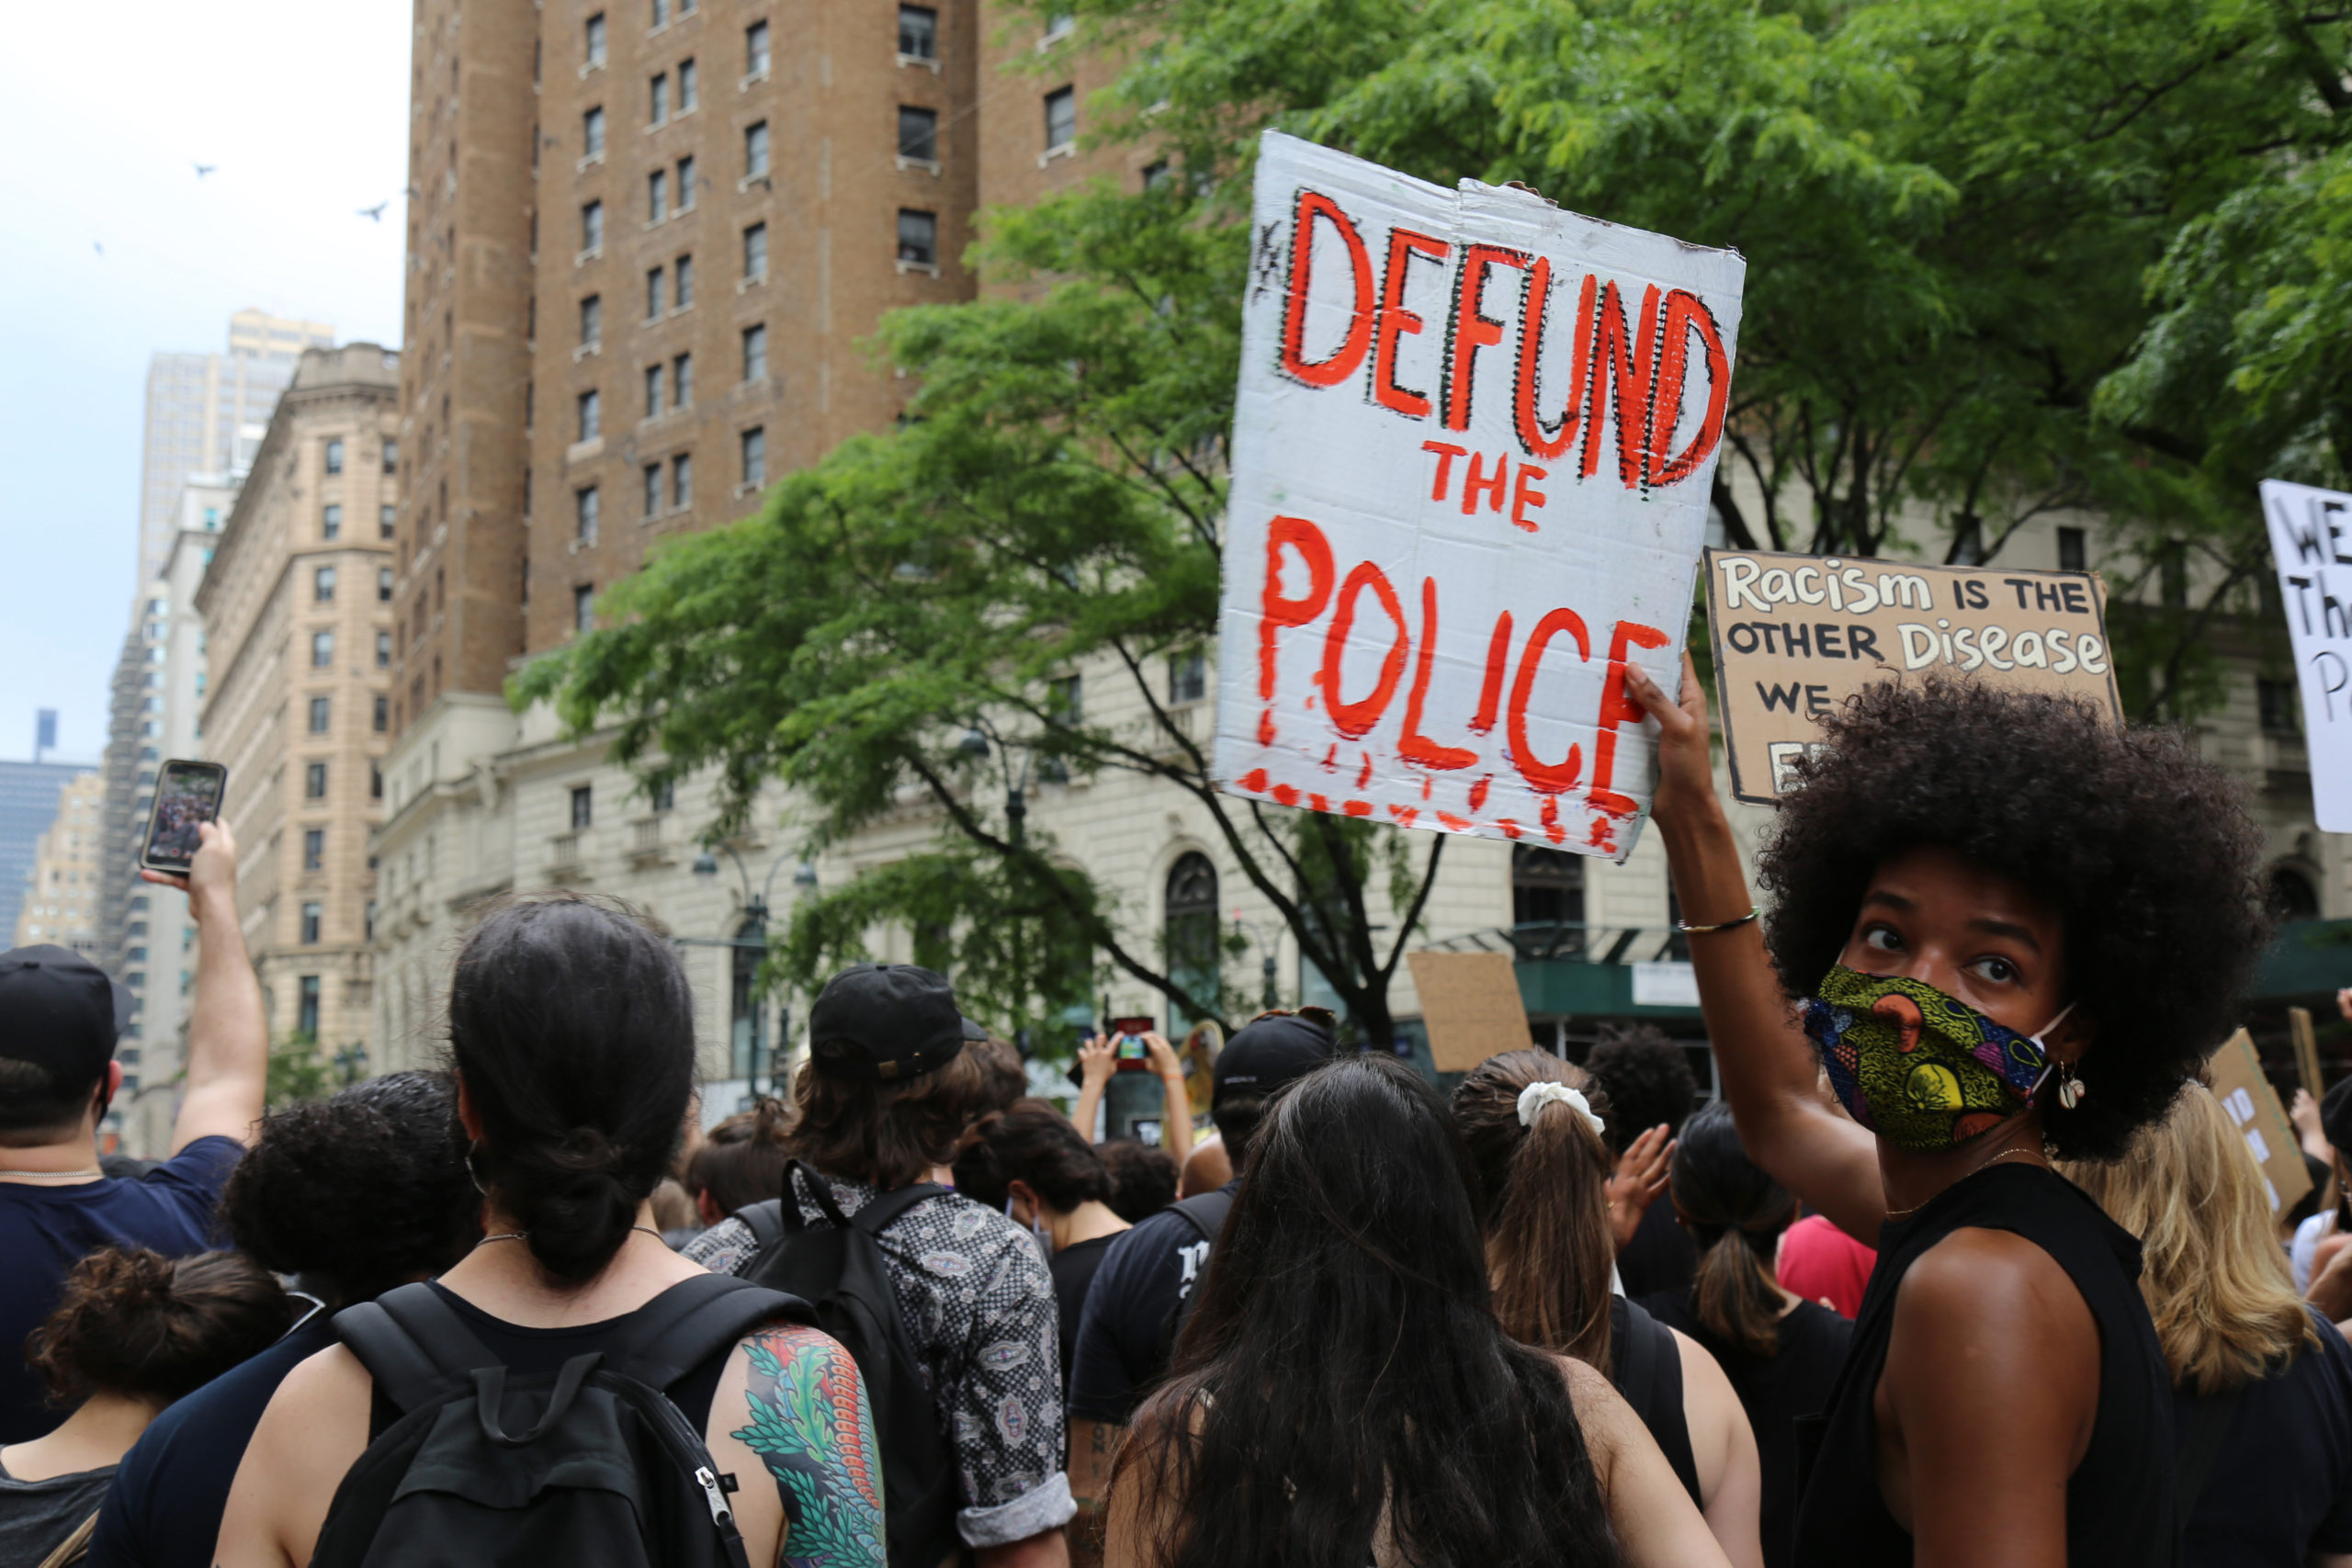 defund the police Protesters march Saturday, June 6, 2020, in New York. Demonstrations continue across the United States in protest of racism and police brutality, sparked by the May 25 death of George Floyd in police custody in Minneapolis. (AP Photo/Ragan Clark)